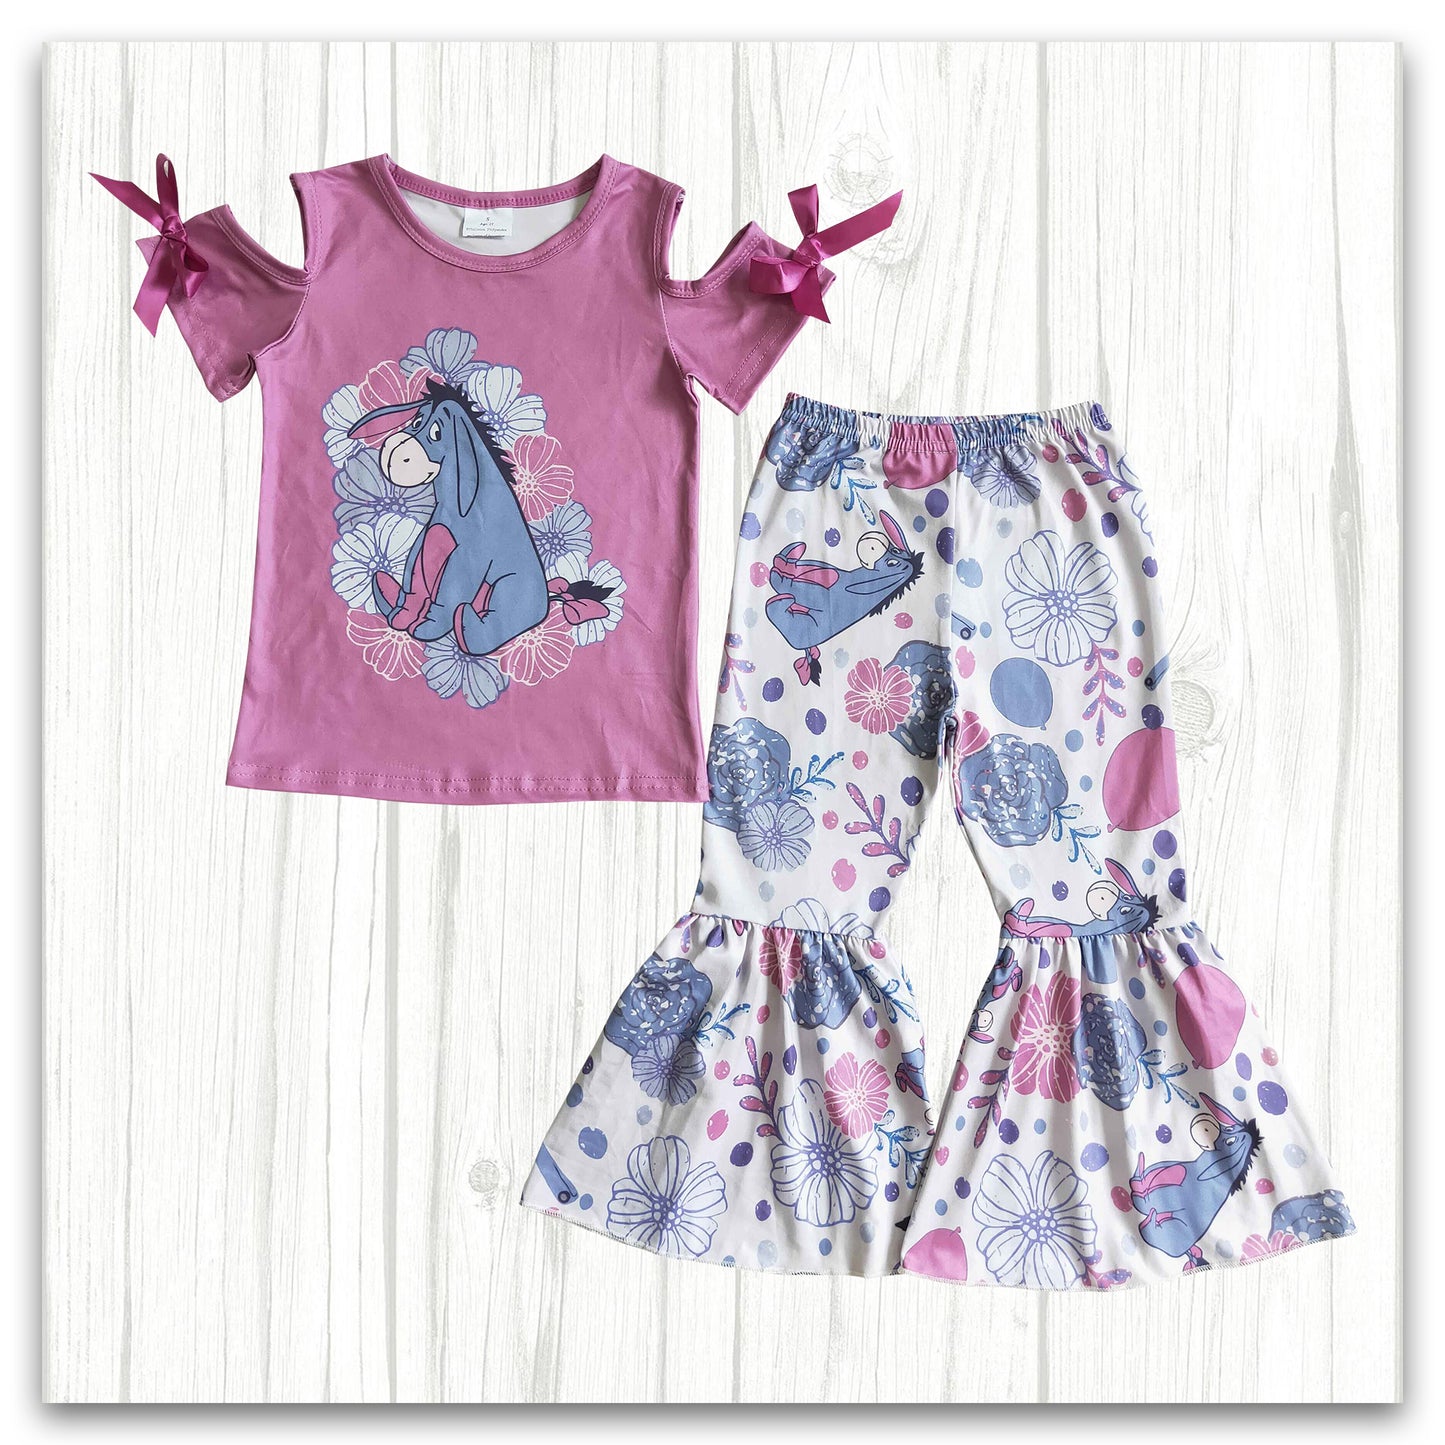 girl's cute outfit clothes set